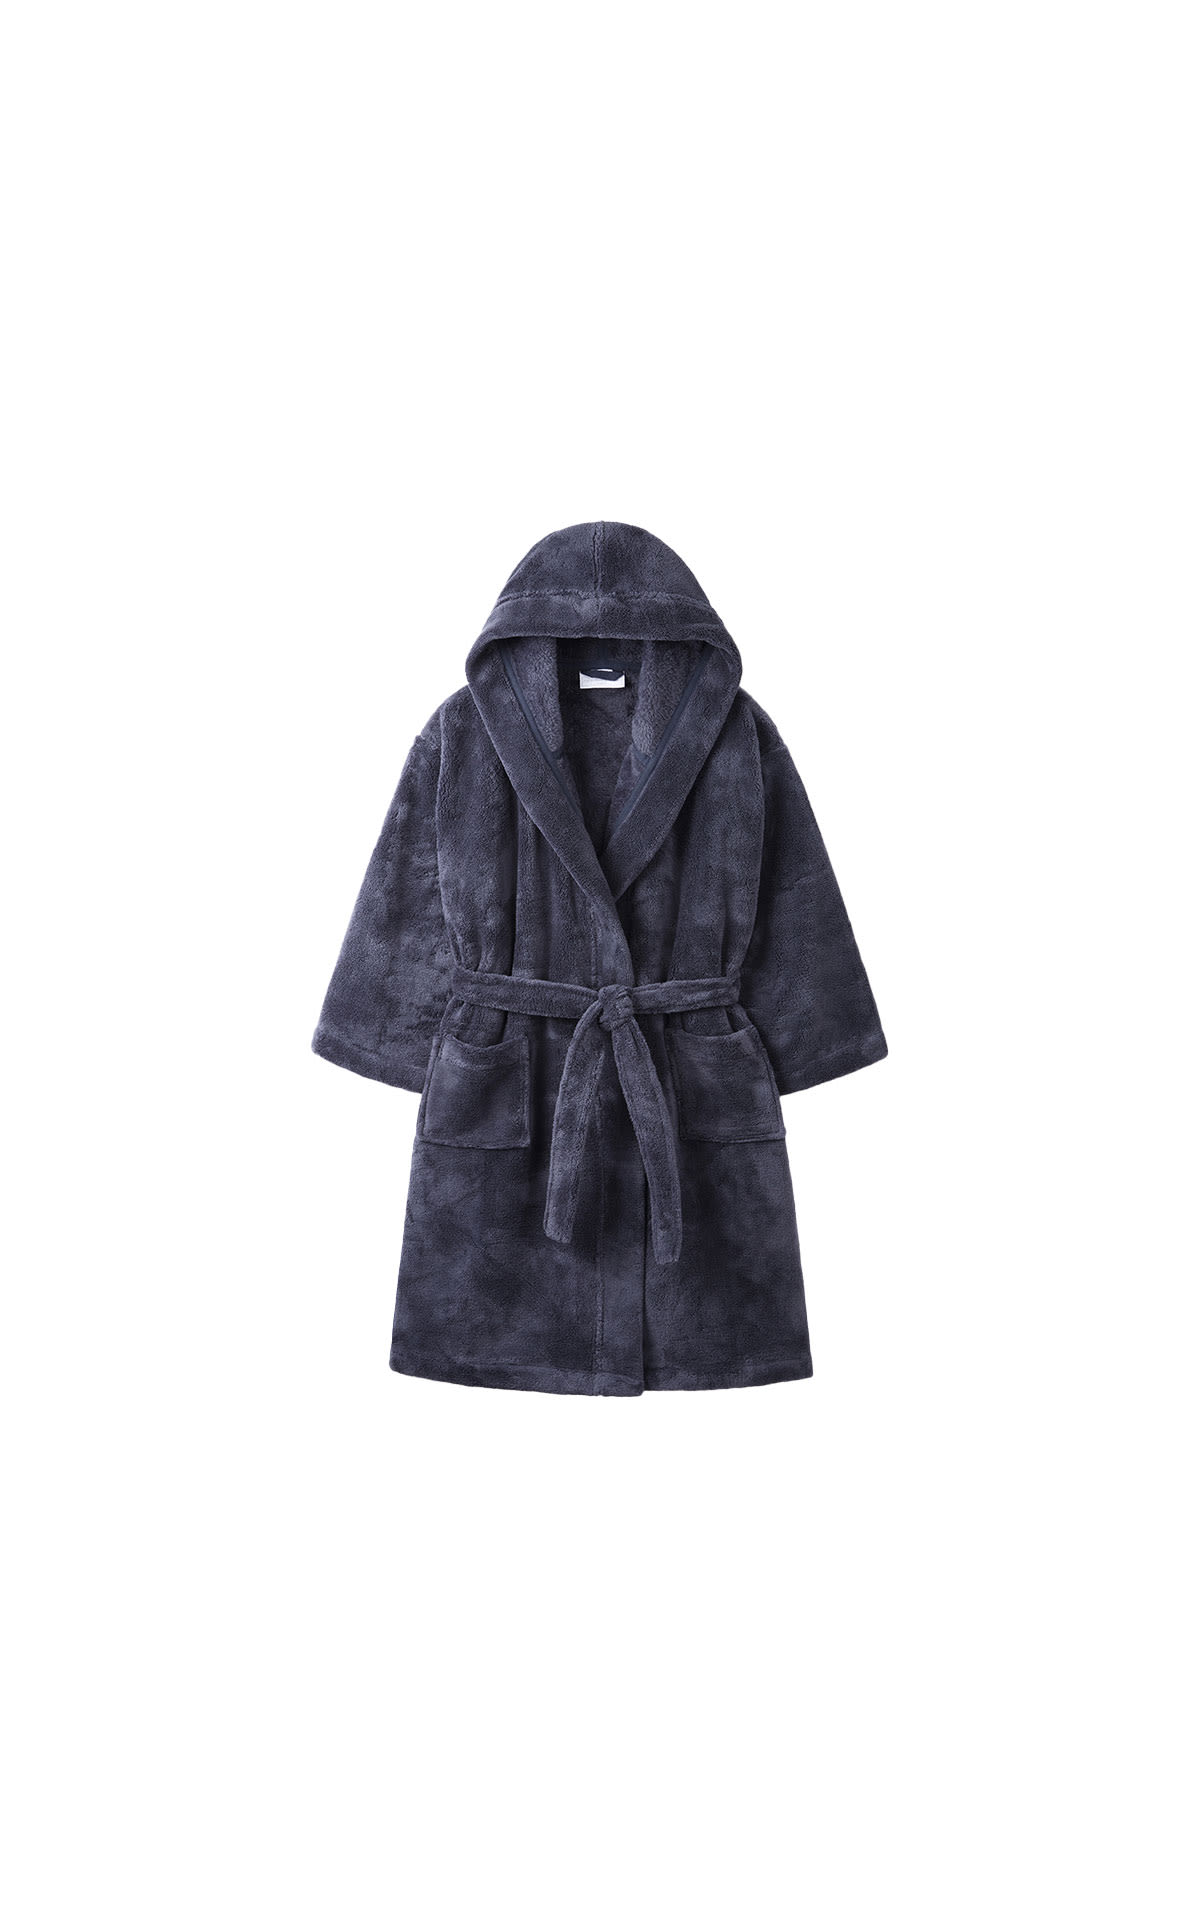 The White Company Navy snuggle robe from Bicester Village